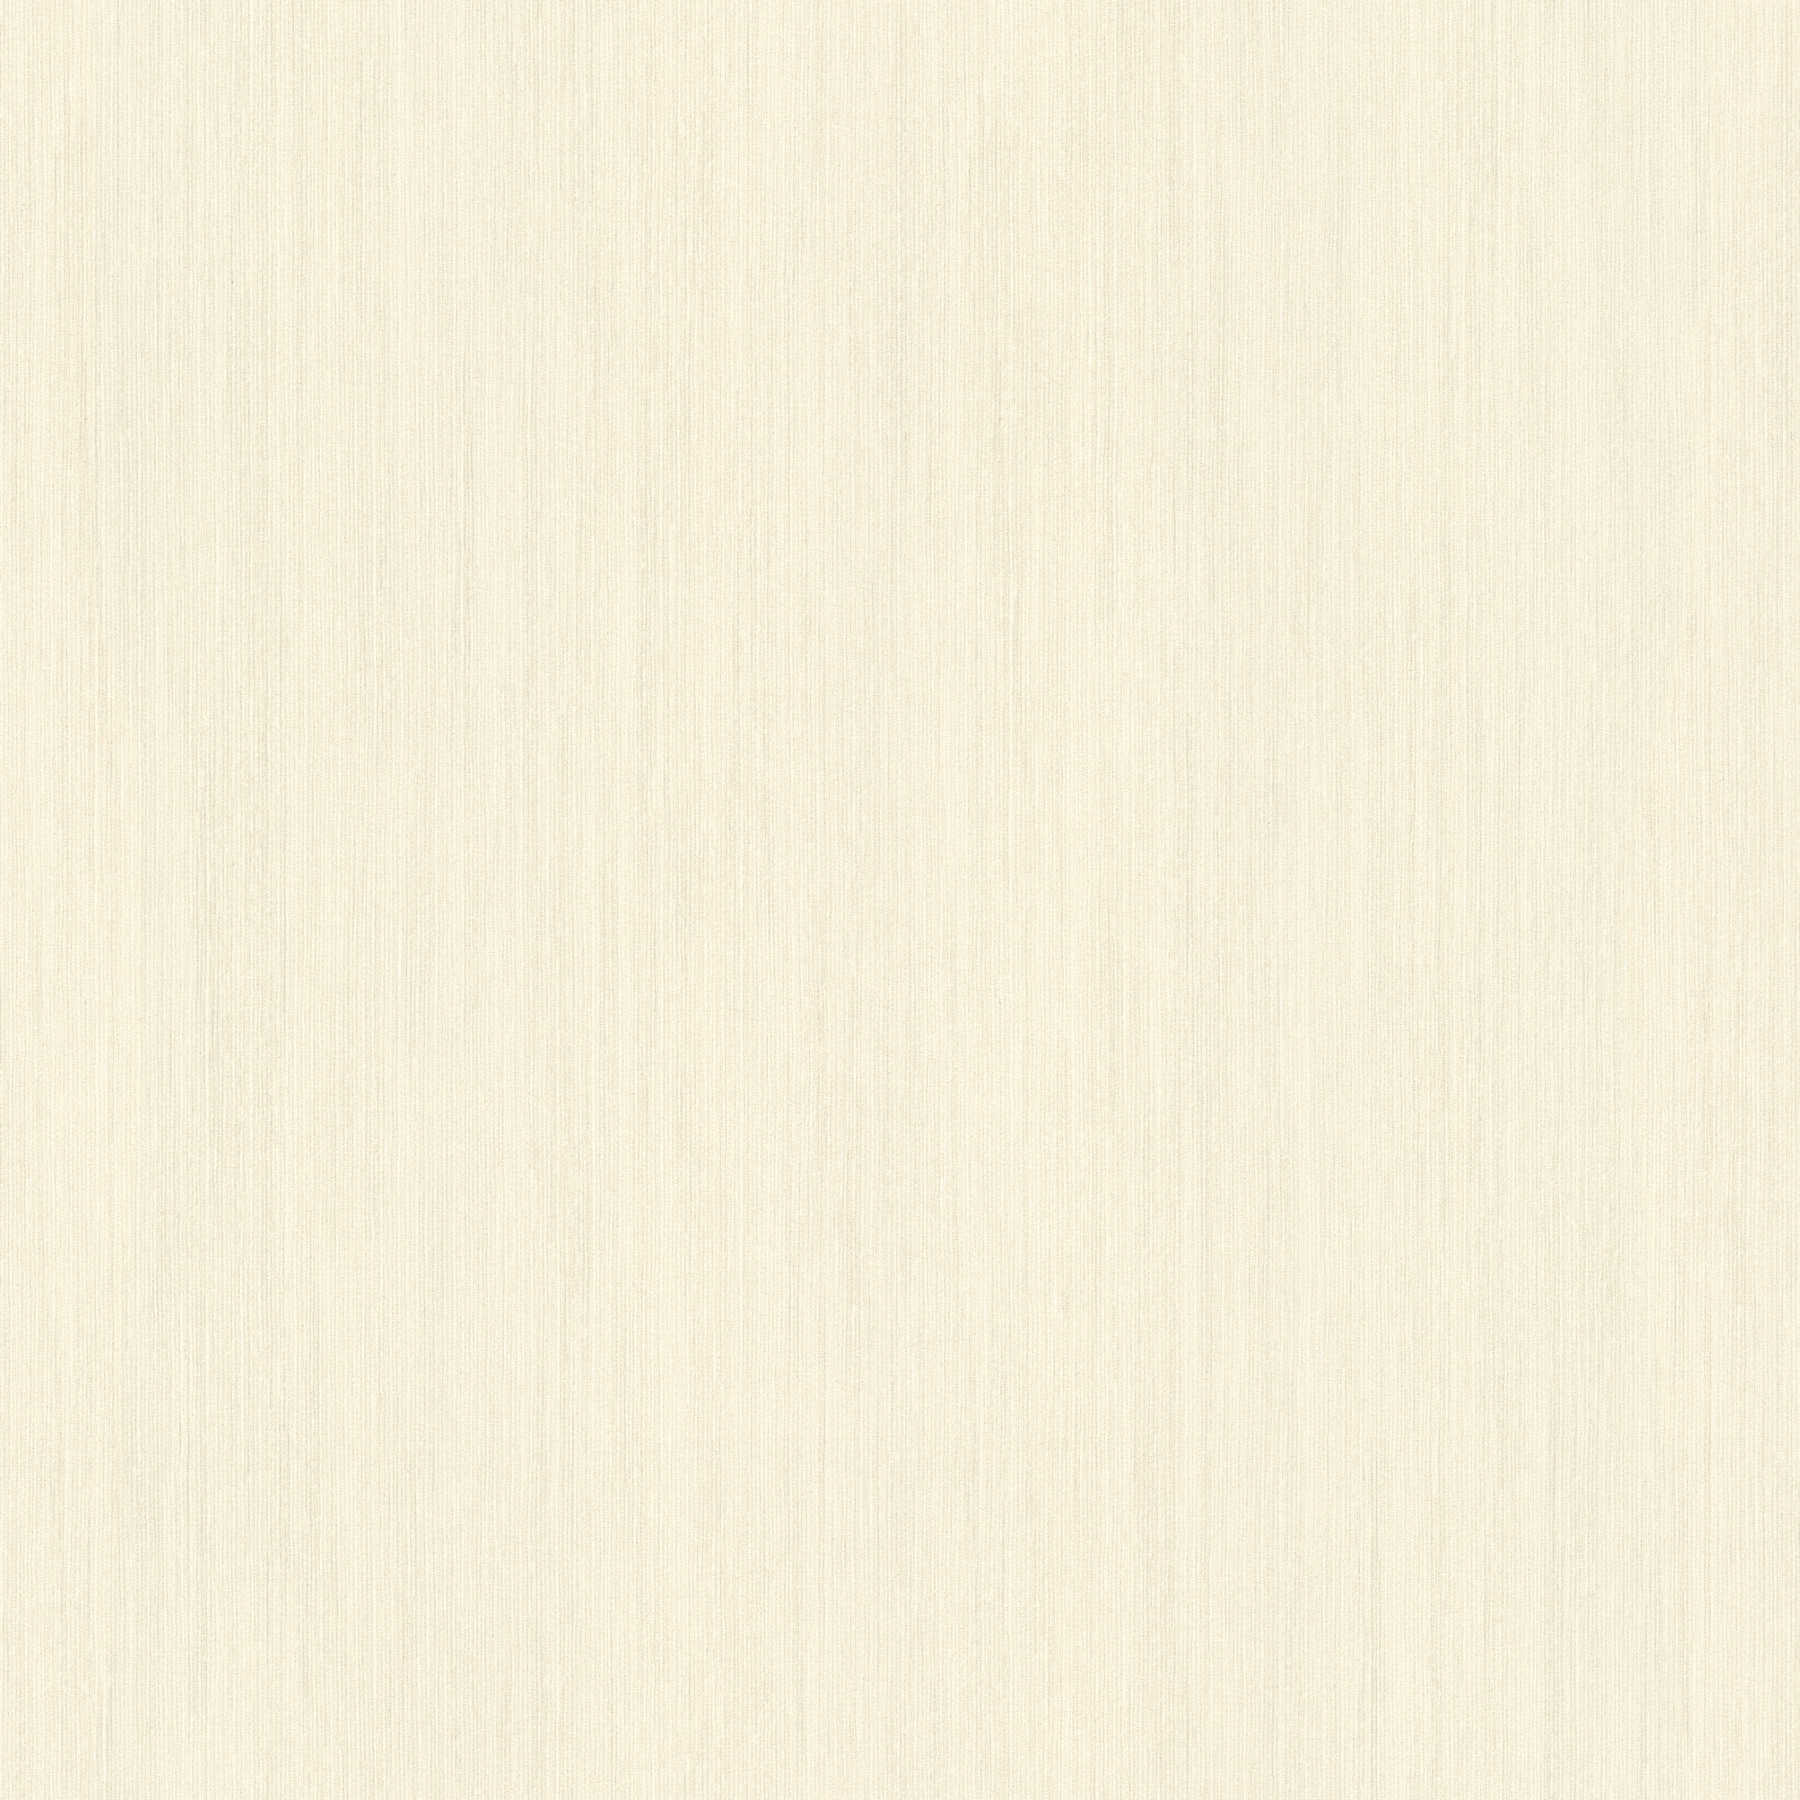 Plain wallpaper cream-beige with embossed pattern & matte surface
